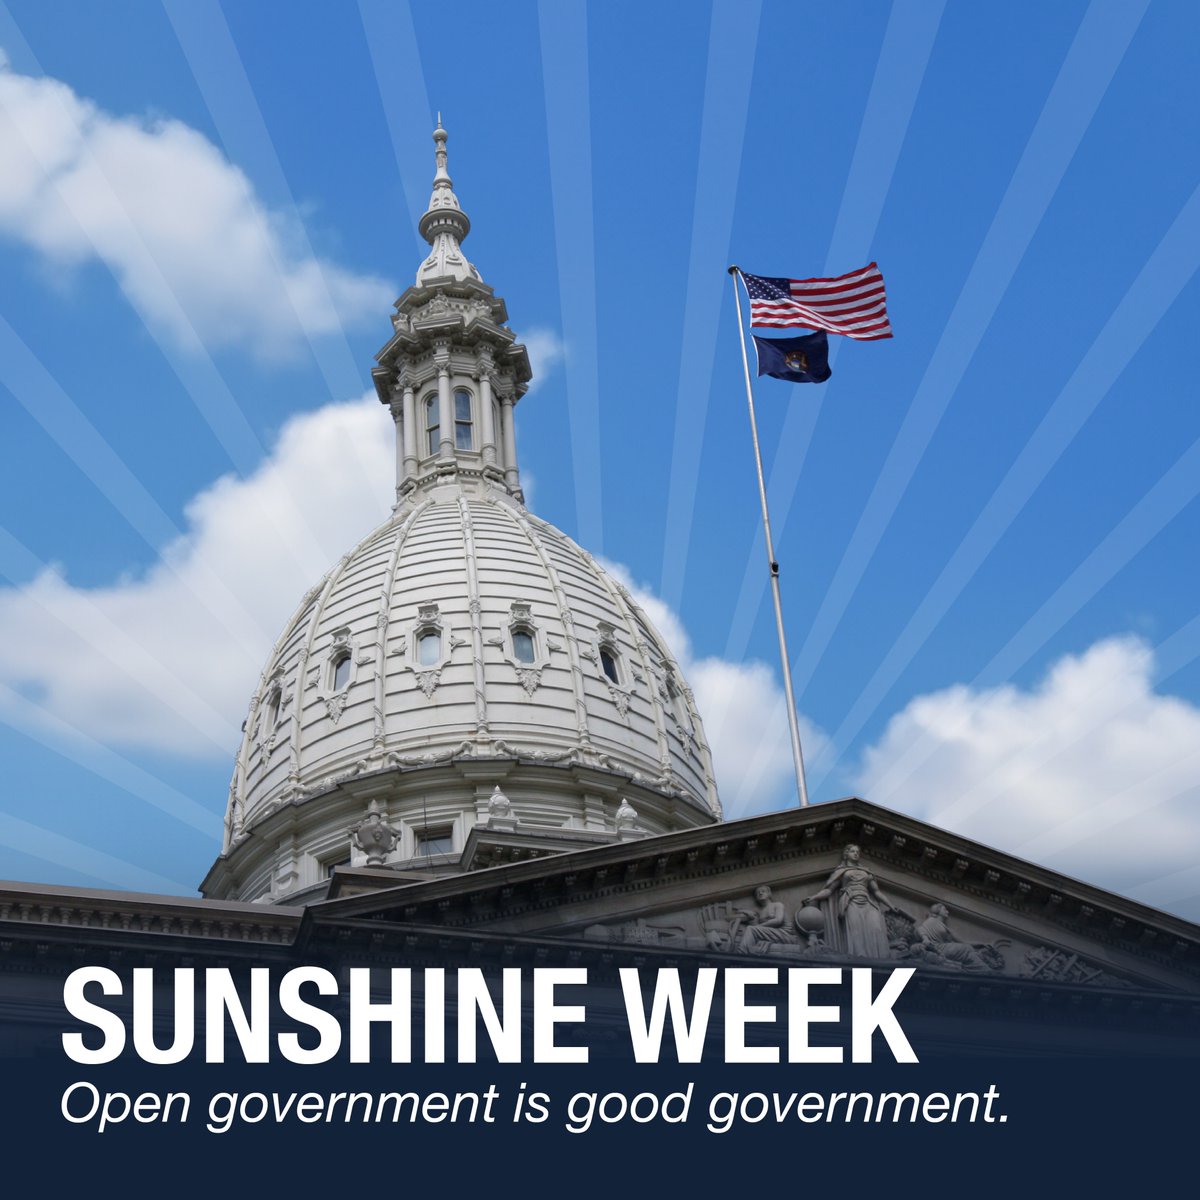 For decades, MI has had some of the weakest government integrity laws in the nation. Last year, we began to shine light by strengthening our financial transparency requirements. This #SunshineWeek, we advanced legislation to subject the legislature and governor's office to FOIA.